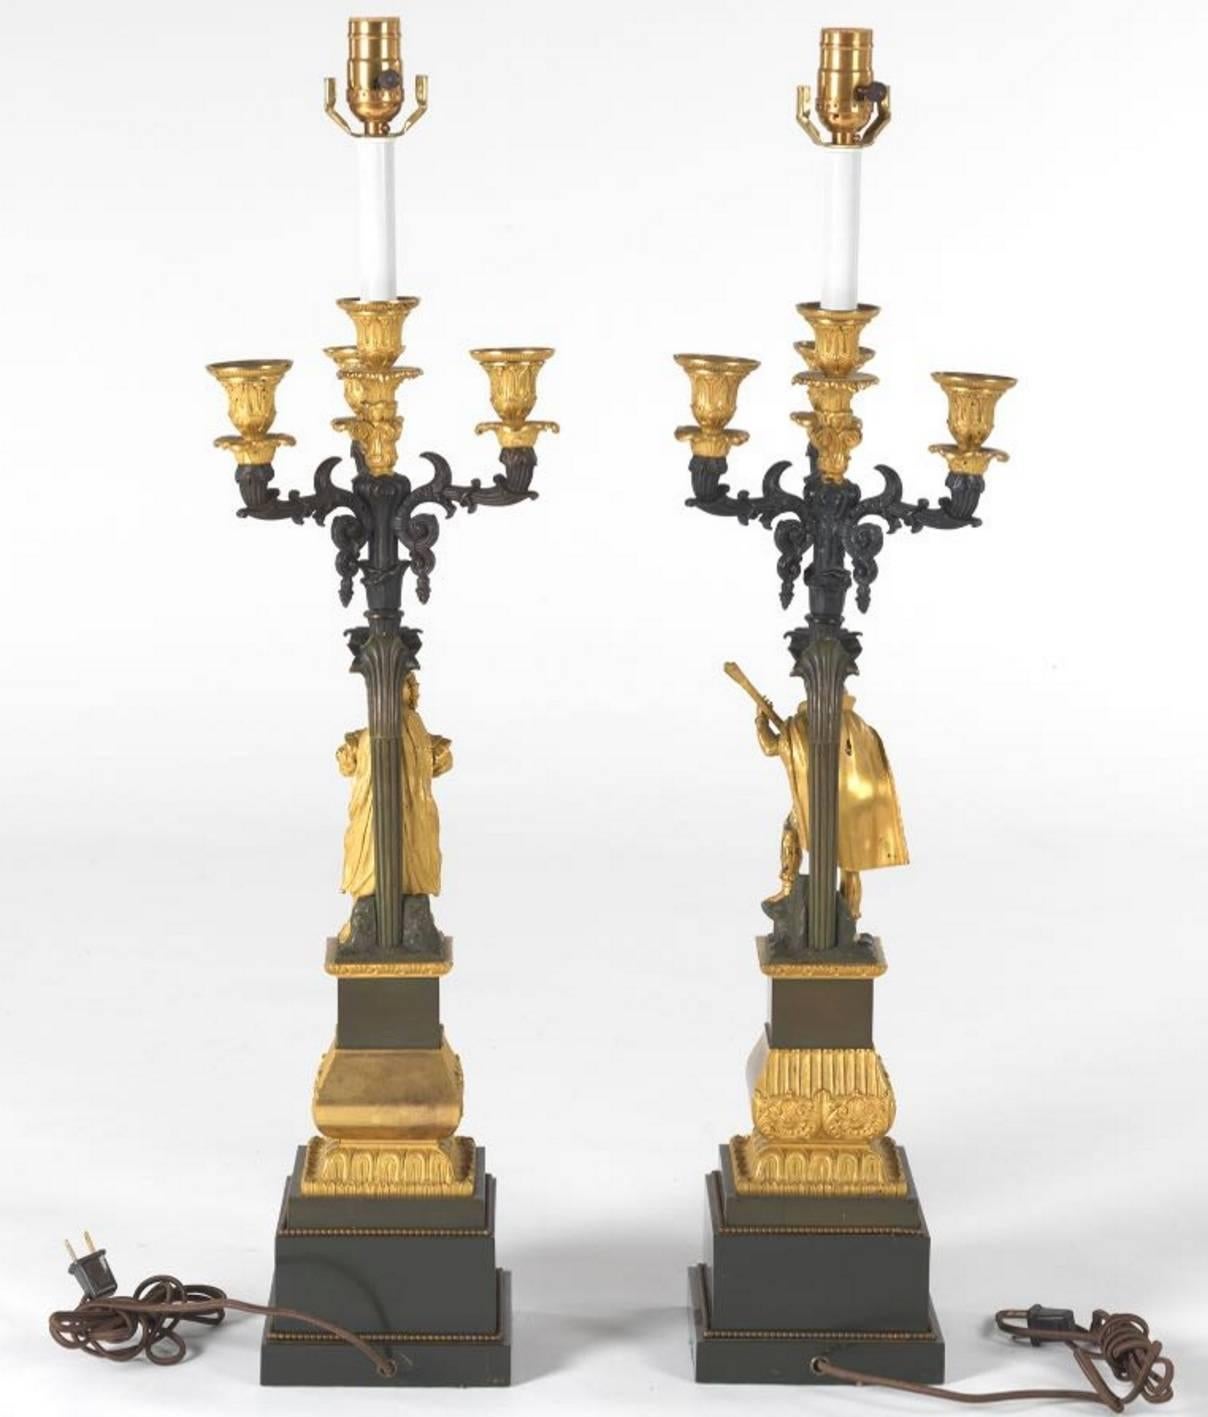 Louis Philippe Pair of French Ormolu and Patinated Bronze Four-Light Candelabra Lamps